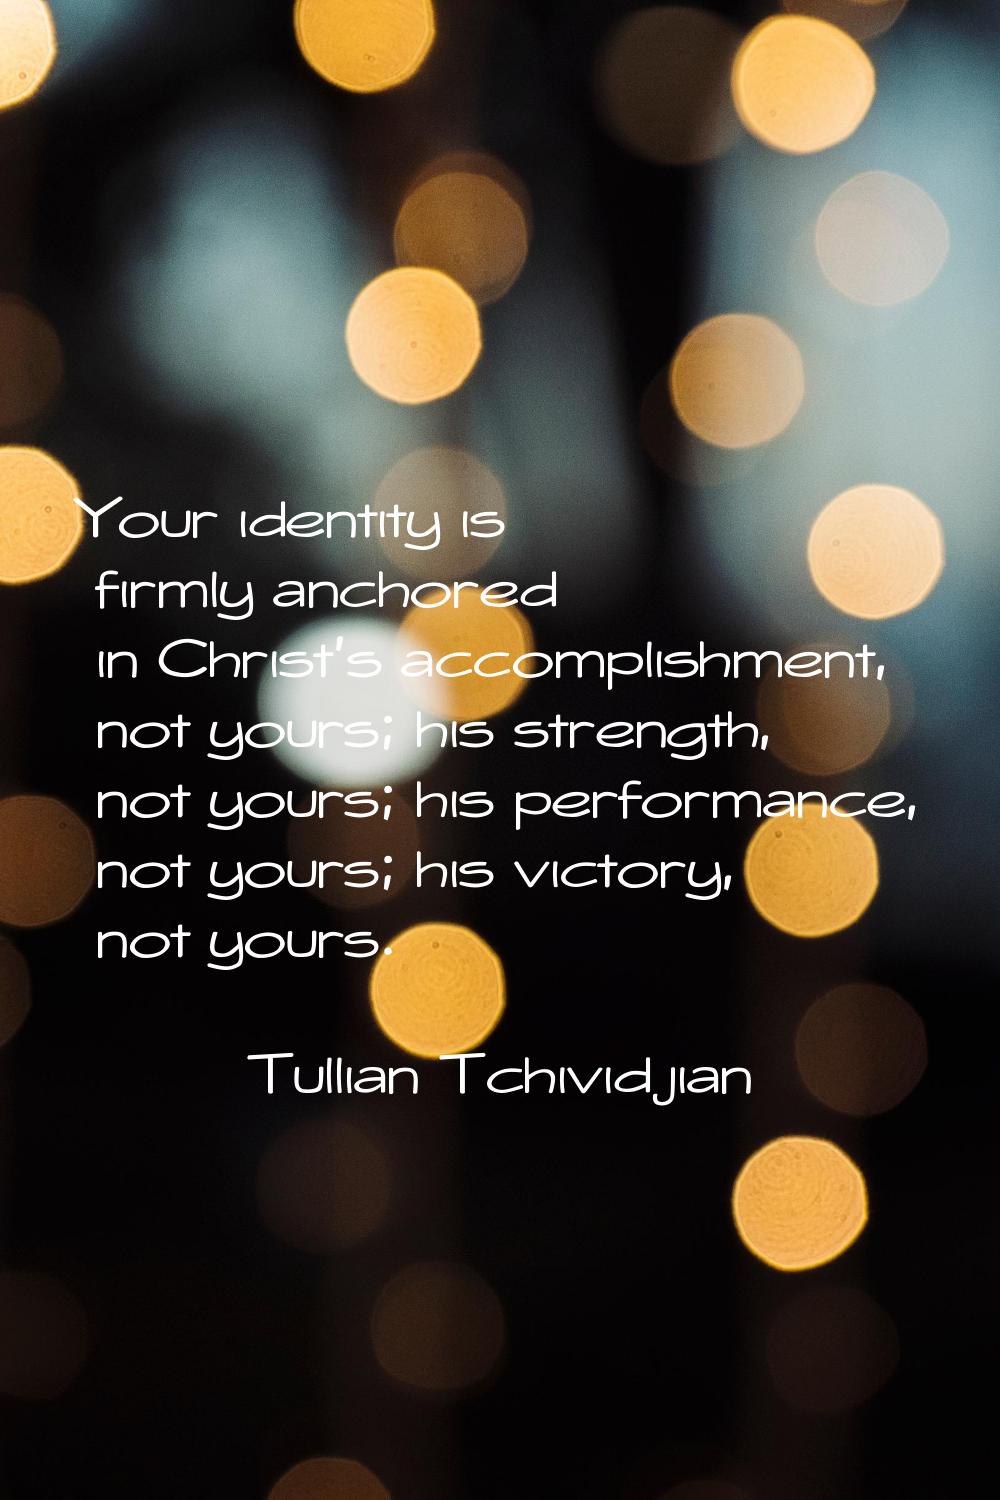 Your identity is firmly anchored in Christ's accomplishment, not yours; his strength, not yours; hi